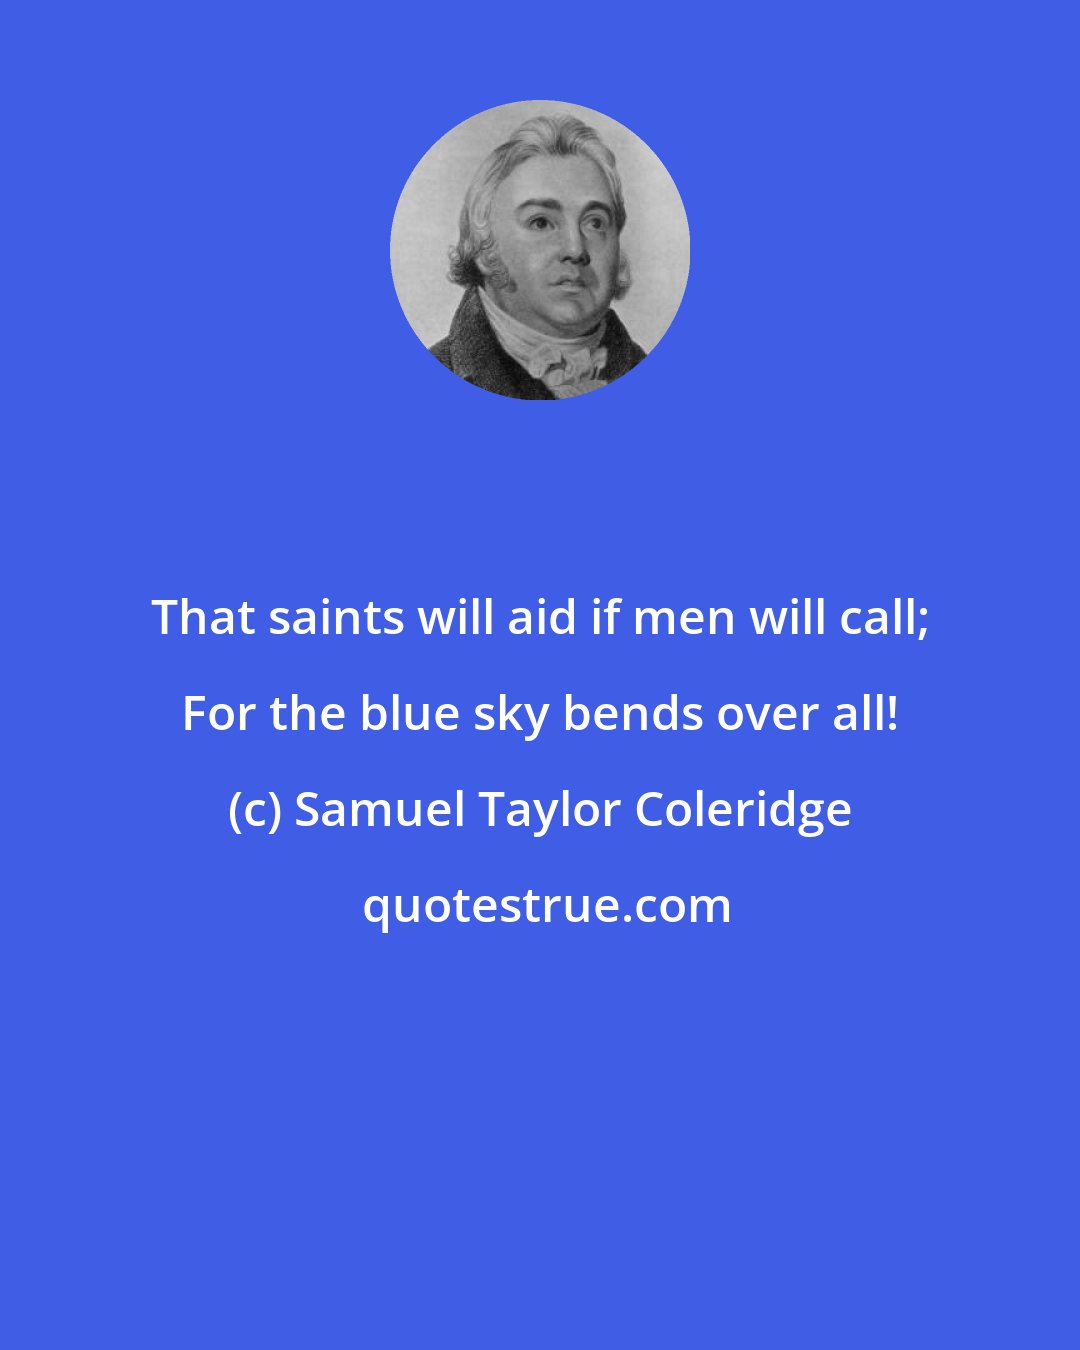 Samuel Taylor Coleridge: That saints will aid if men will call; For the blue sky bends over all!